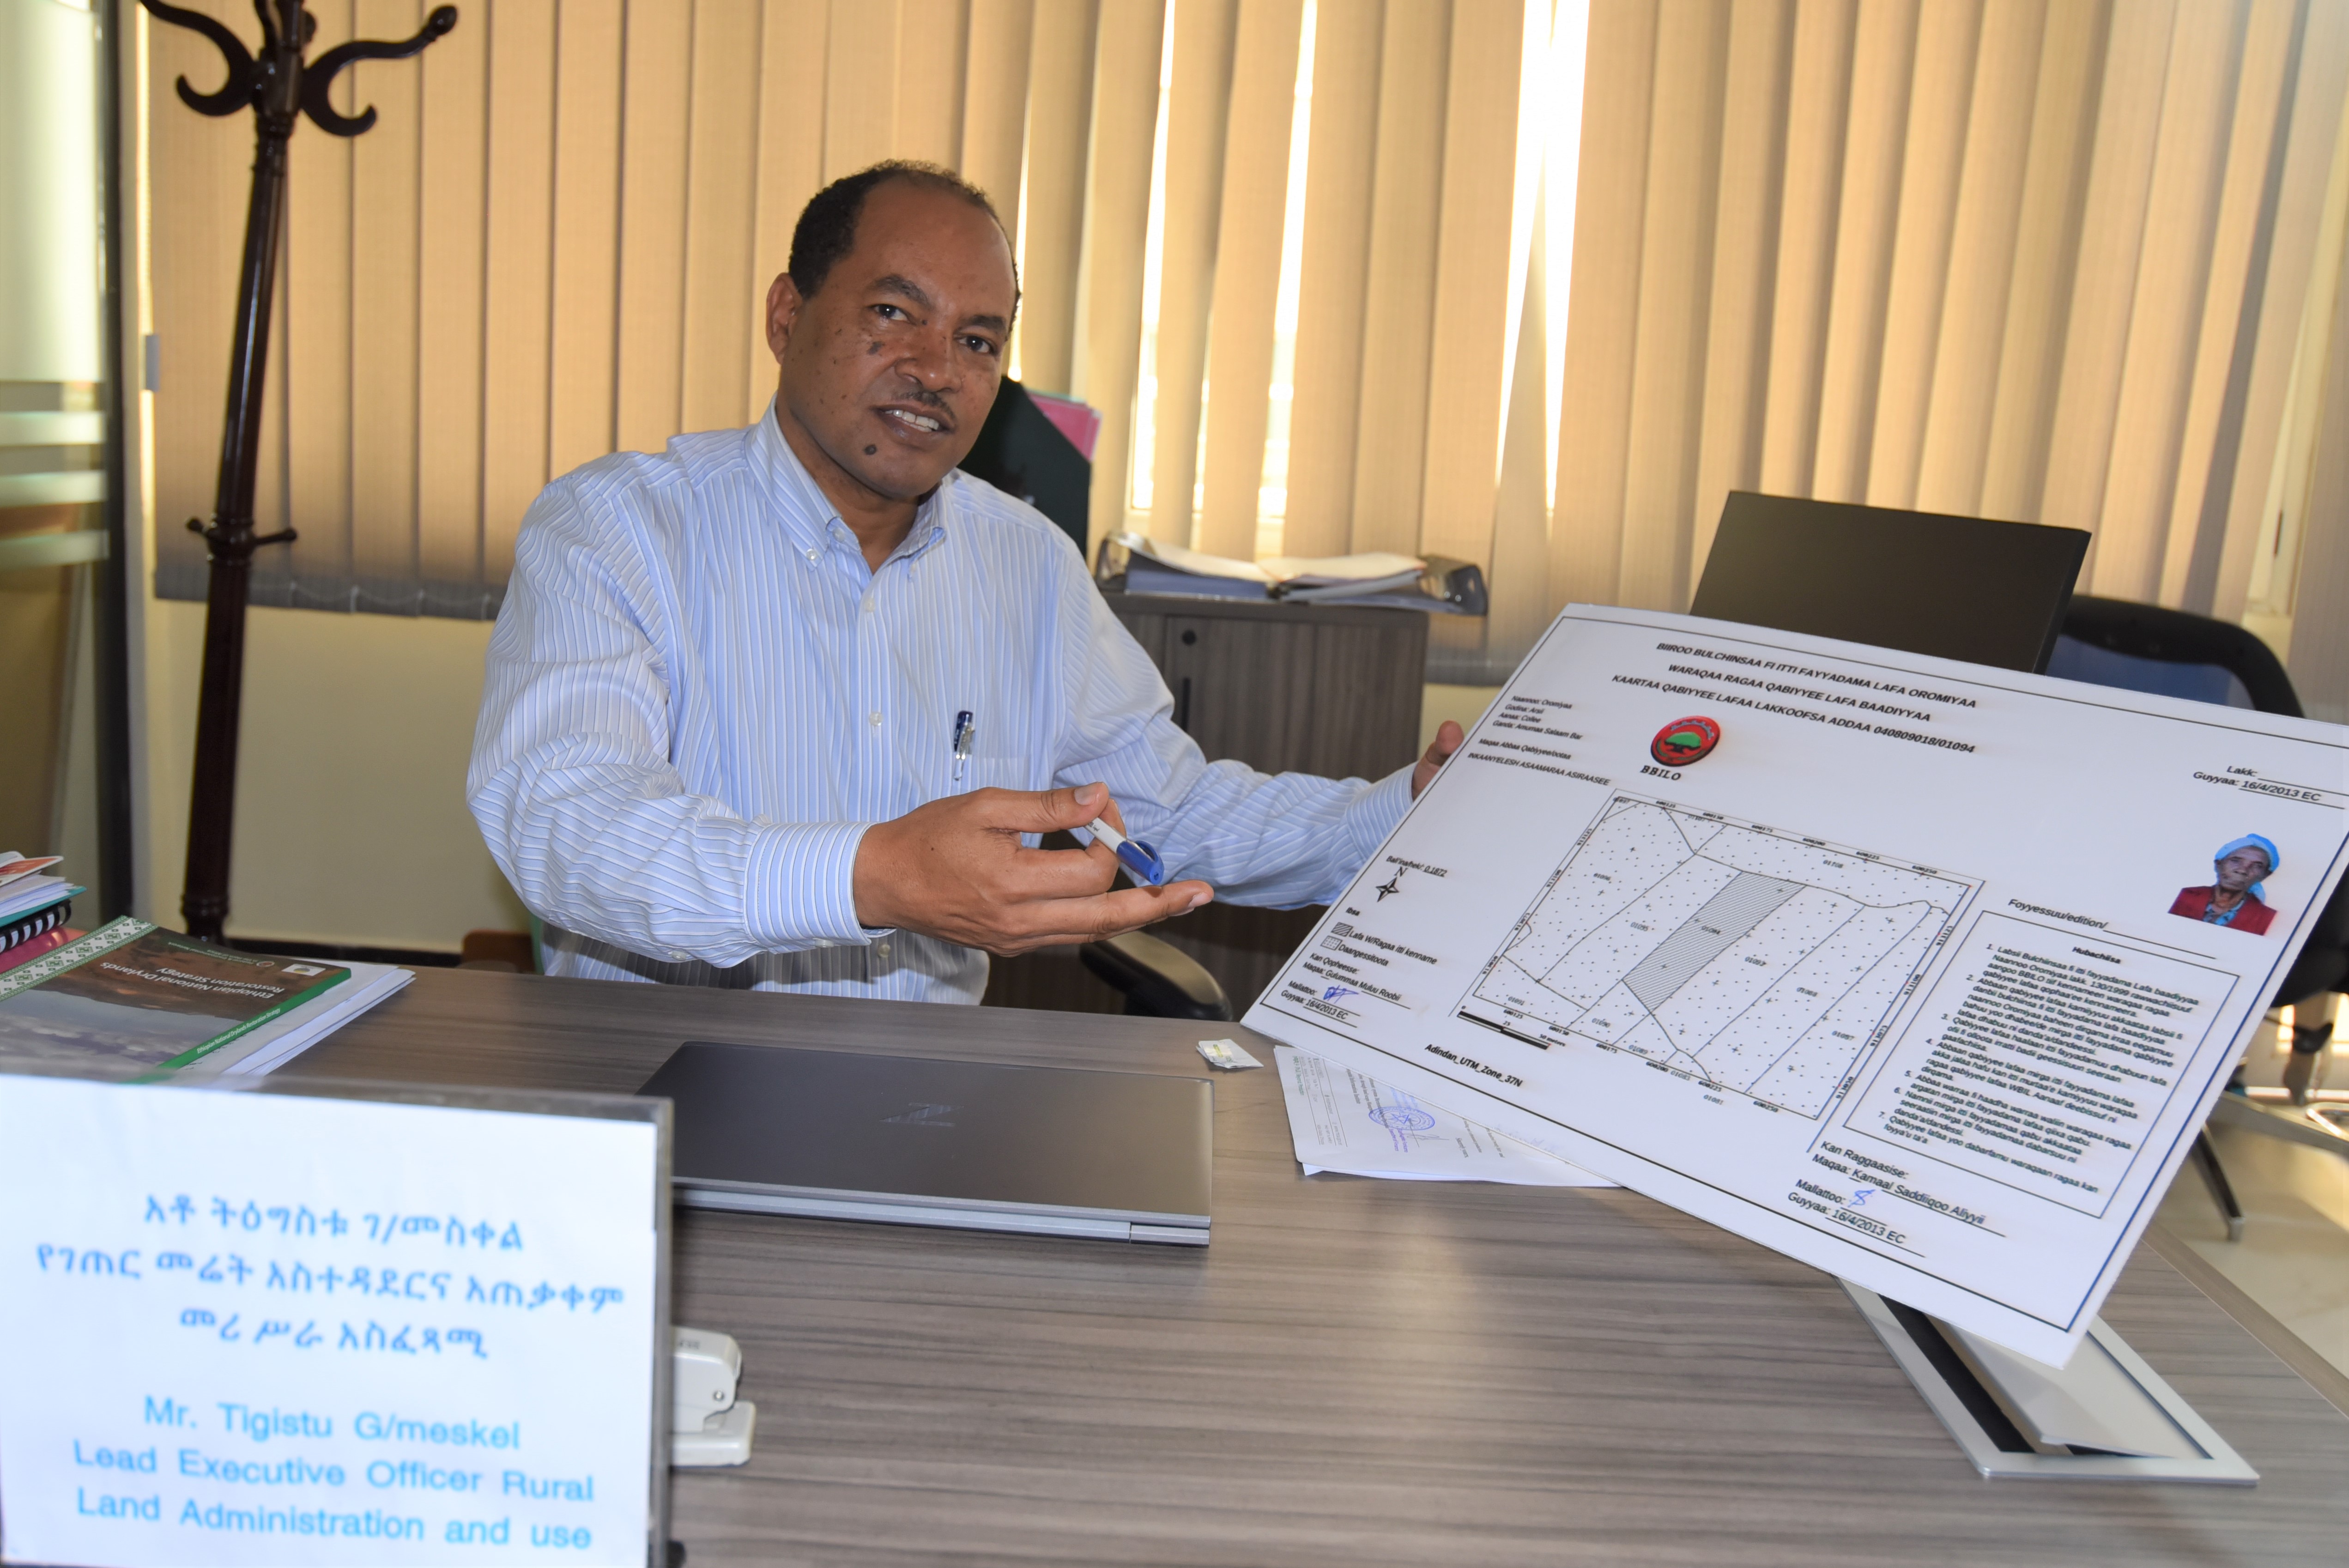 Mr.  Tigisut G/Meskel,  the Rural Land Administration and Use  directorate  explains  contents of a sample land certification  from gender prespective. (Photo: UN Women/Fikerte Abebe)